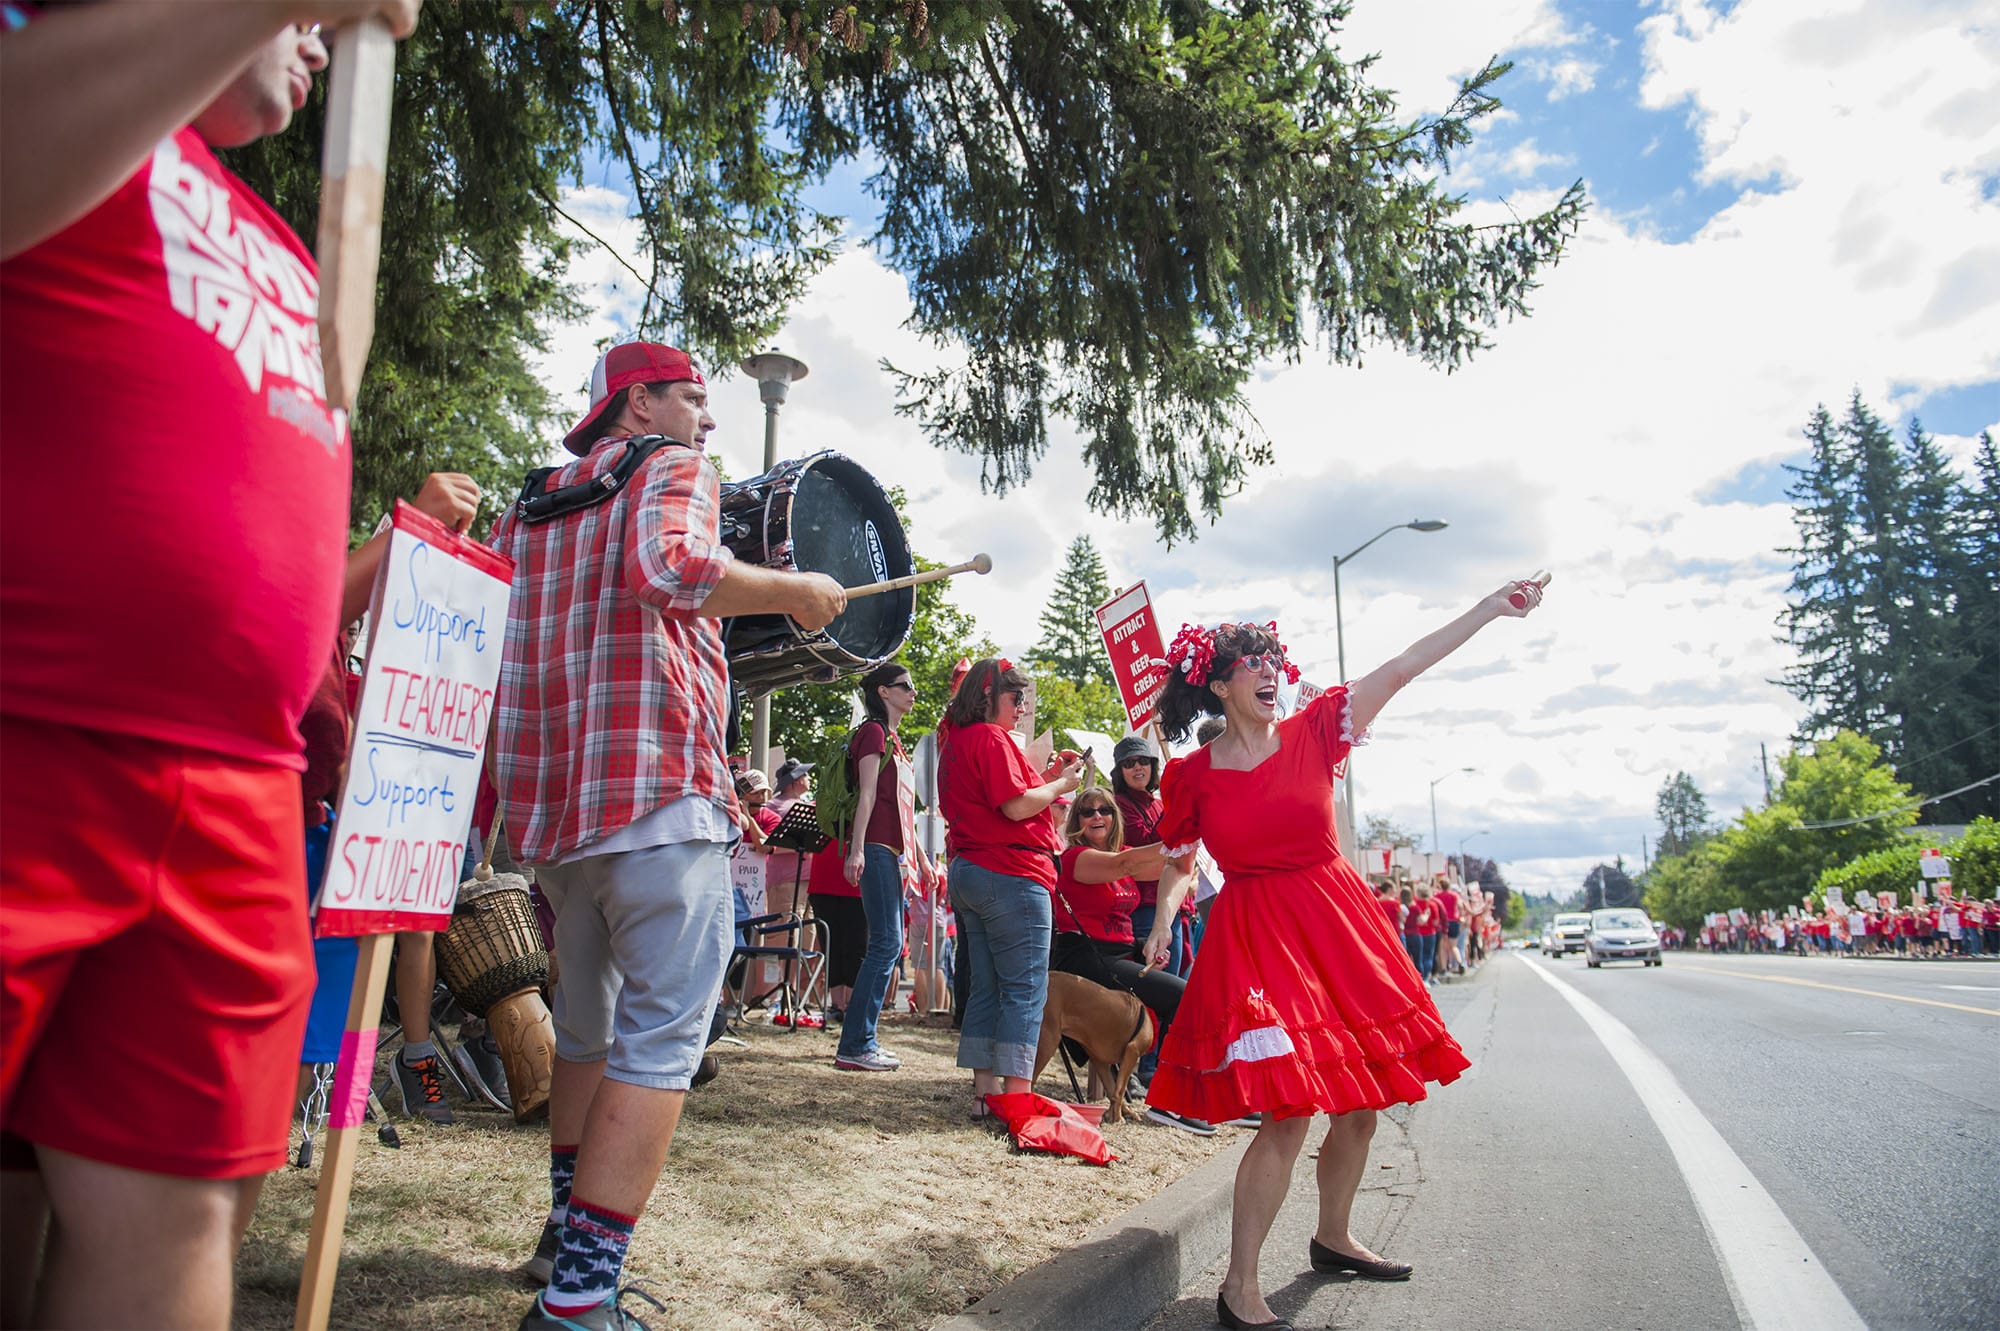 Marta Gray, 7th grader teacher at Thomas Jefferson Middle School, right, leads a cheer while teachers rally in front of the Vancouver Public Schools' Administration Building on Friday afternoon, Aug. 31, 2018.